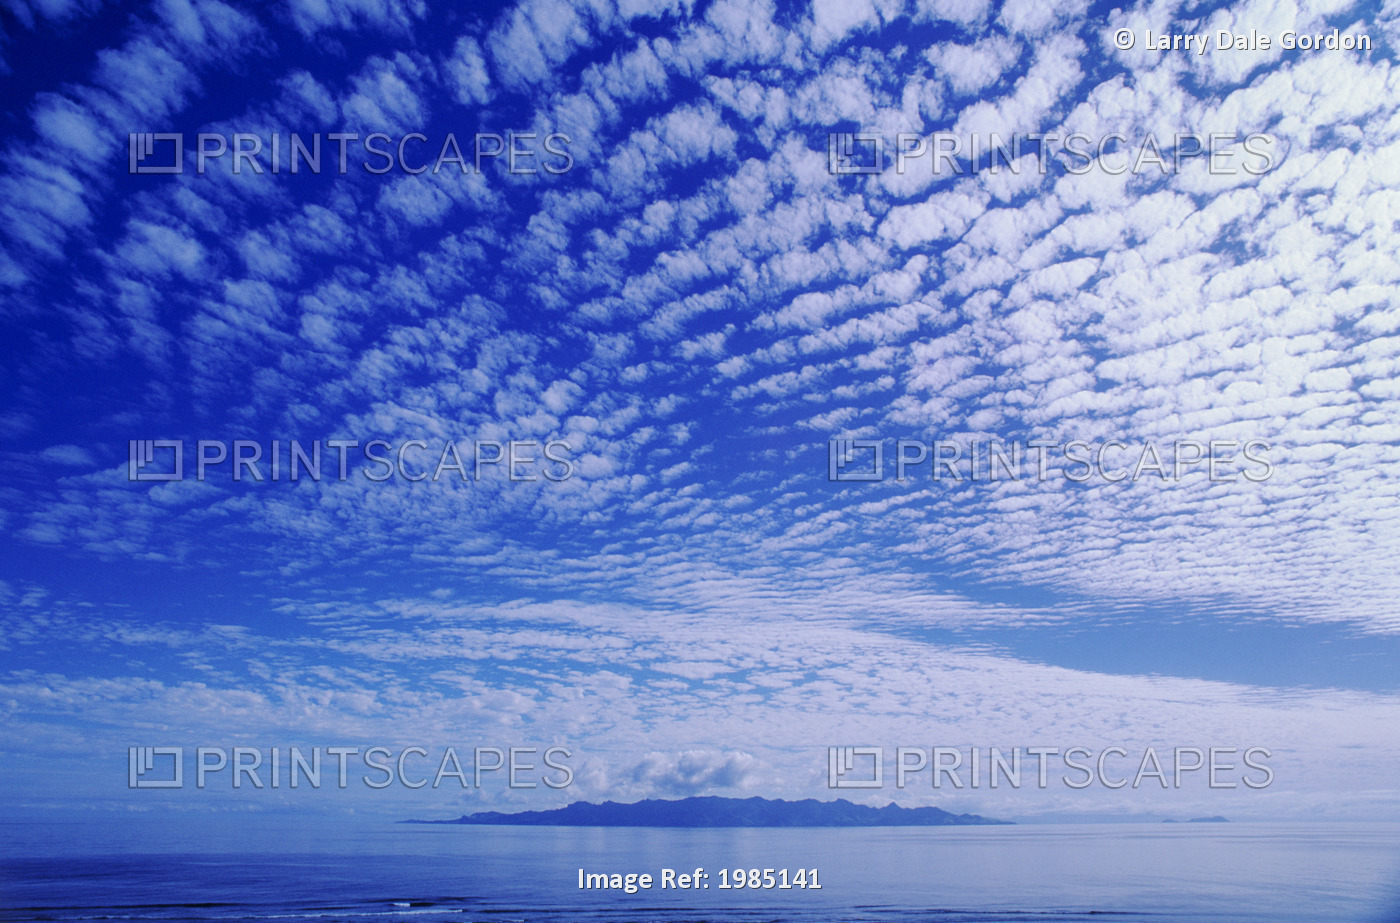 Cotton-Like Clouds In Blue Sky Over Smooth Ocean Water, Island In Distance.